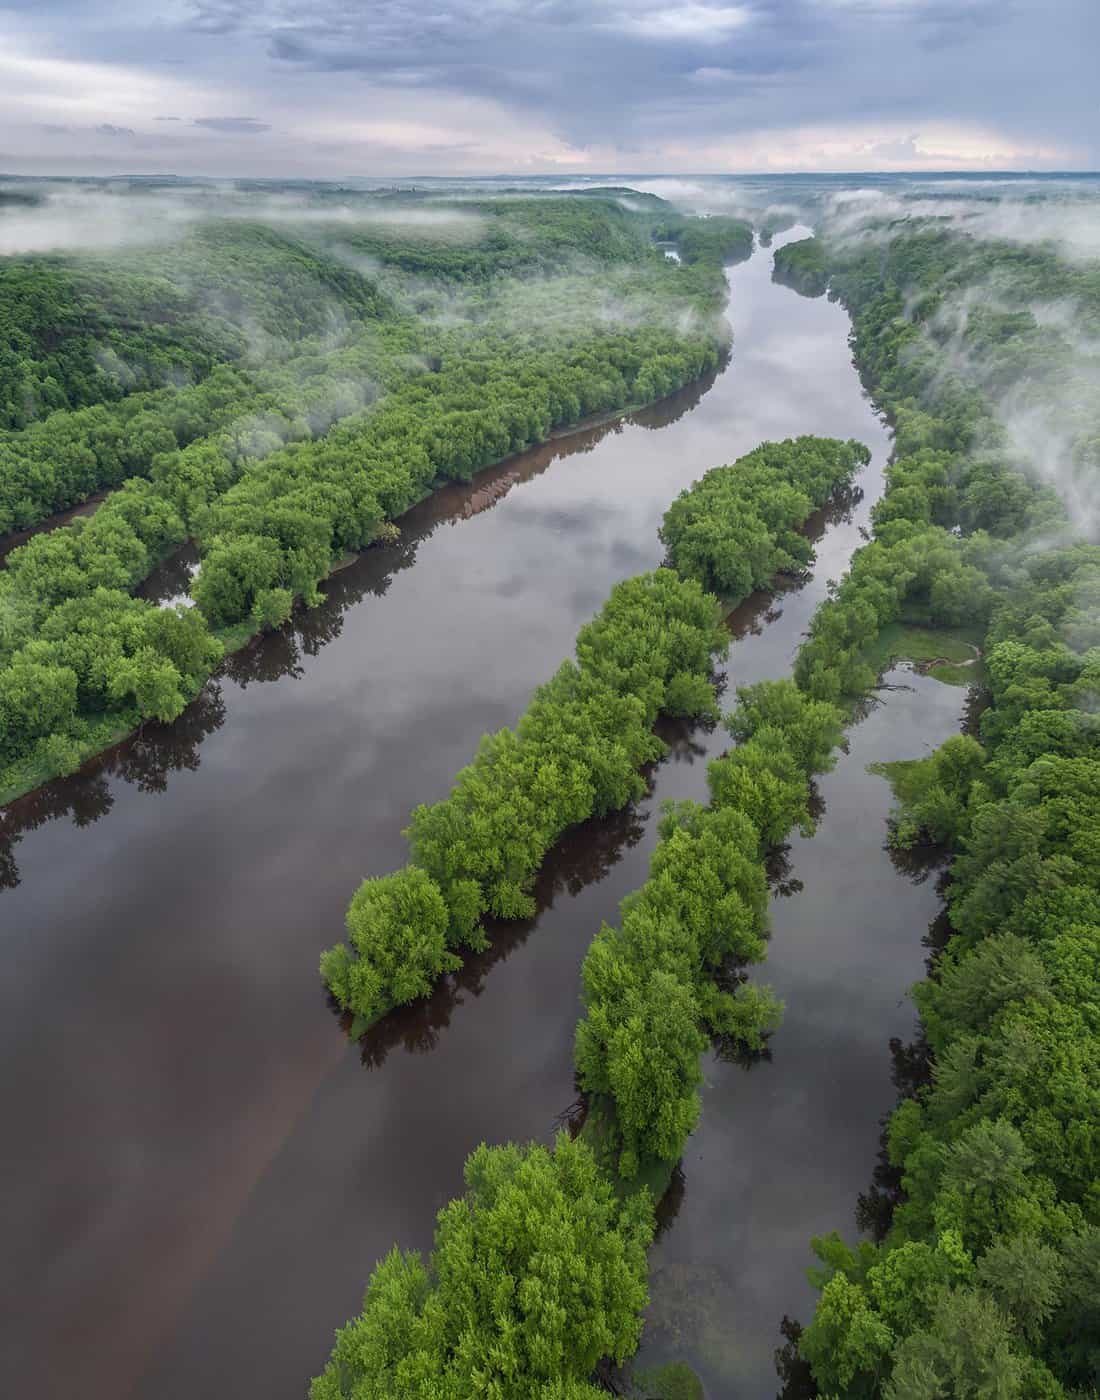 Regulations that prevent tree clearing and building too close to the river serve to keep the St. Croix beautiful and scenic for everyone. Credit: Craig Blacklock